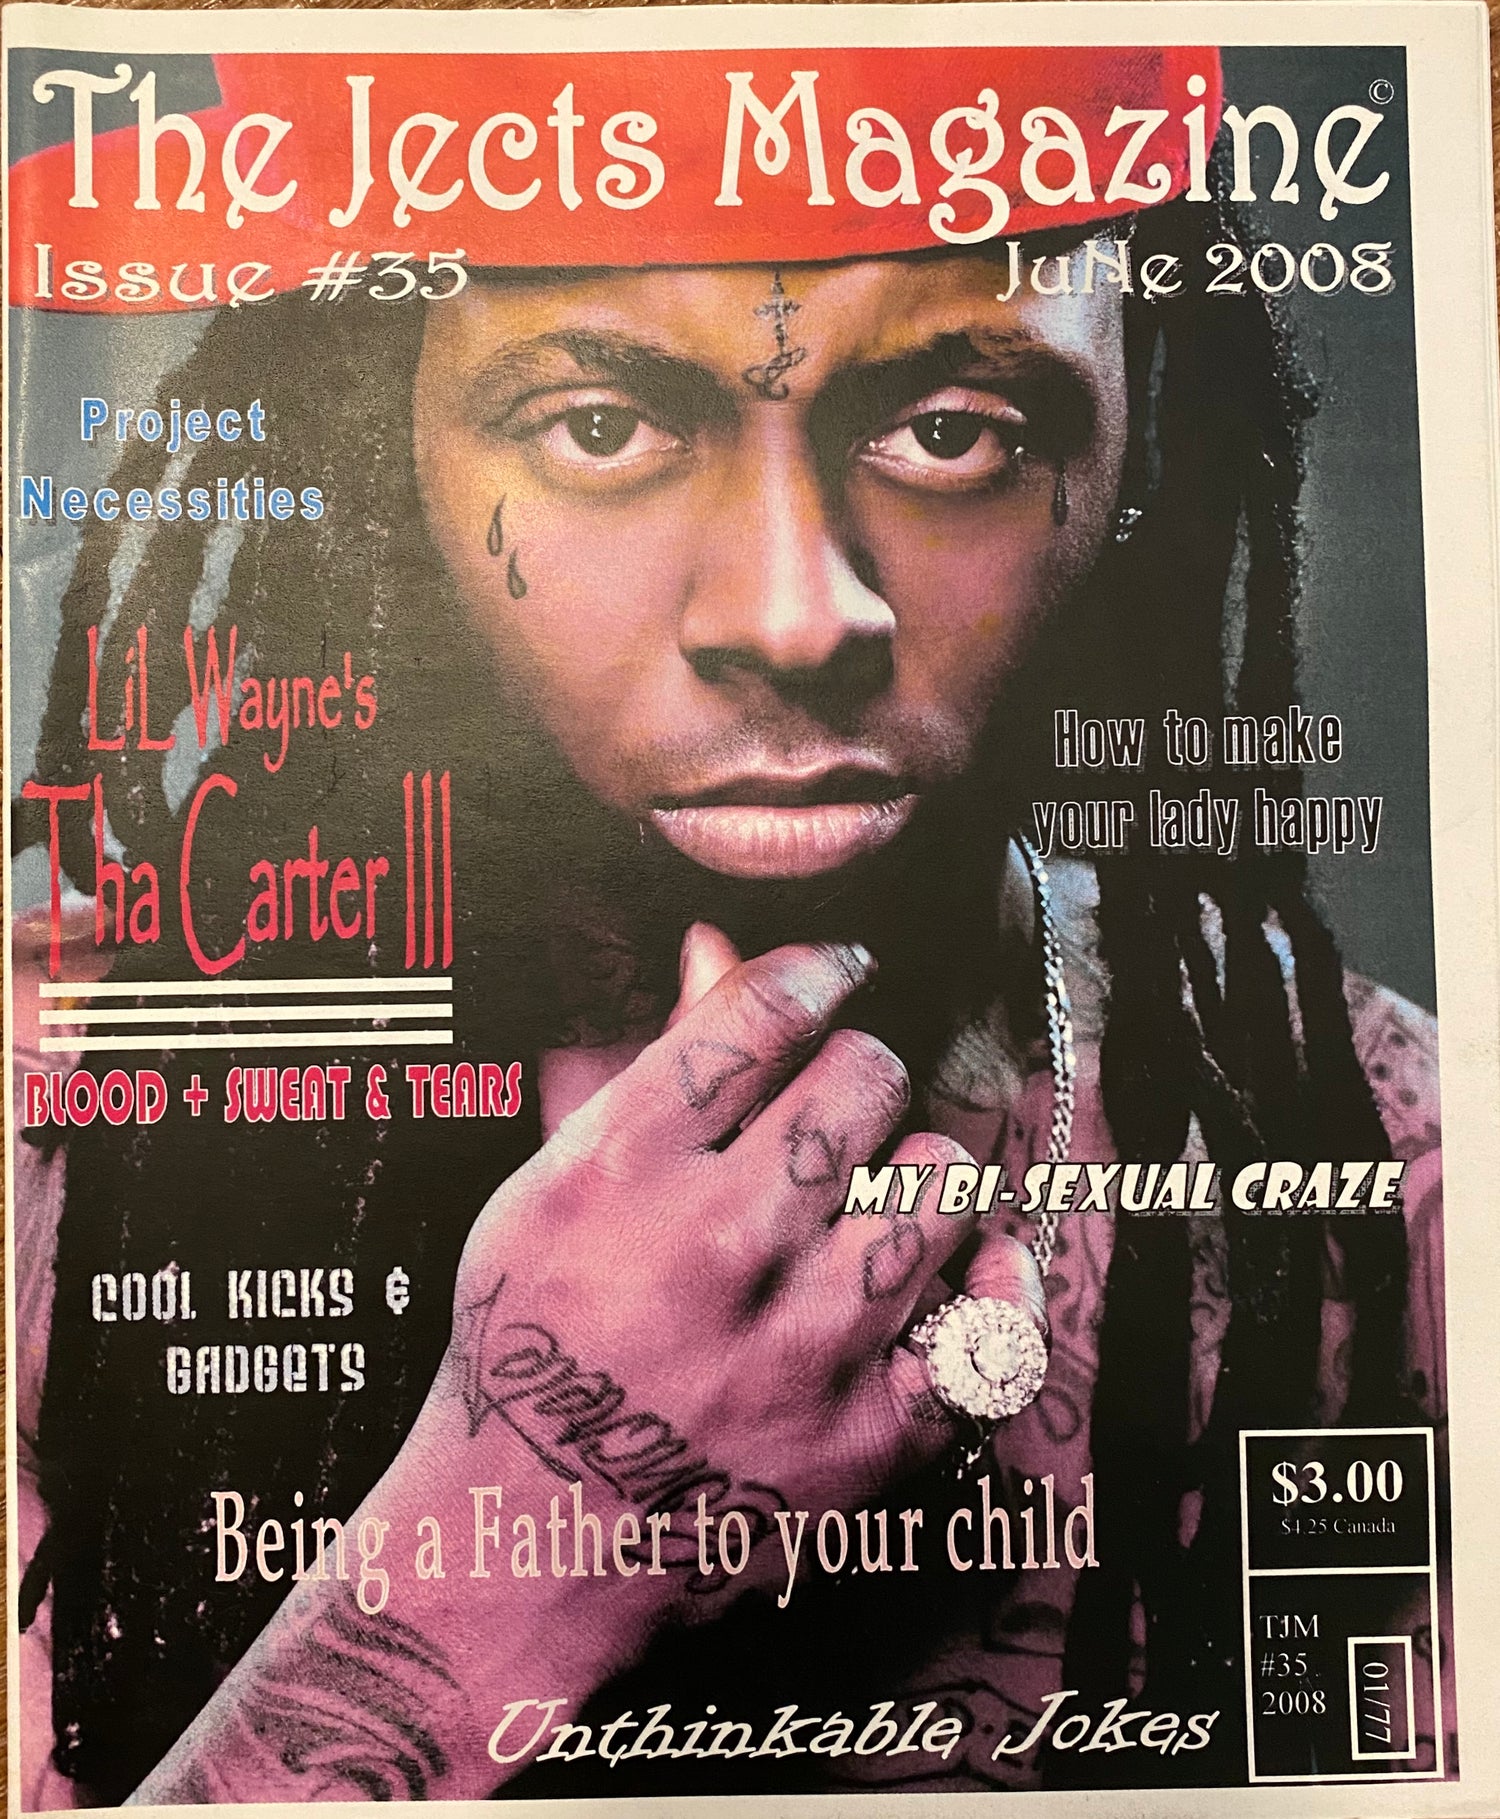 The Jects Magazine Issue 35 Lil Wayne - MoSneaks Shop Online